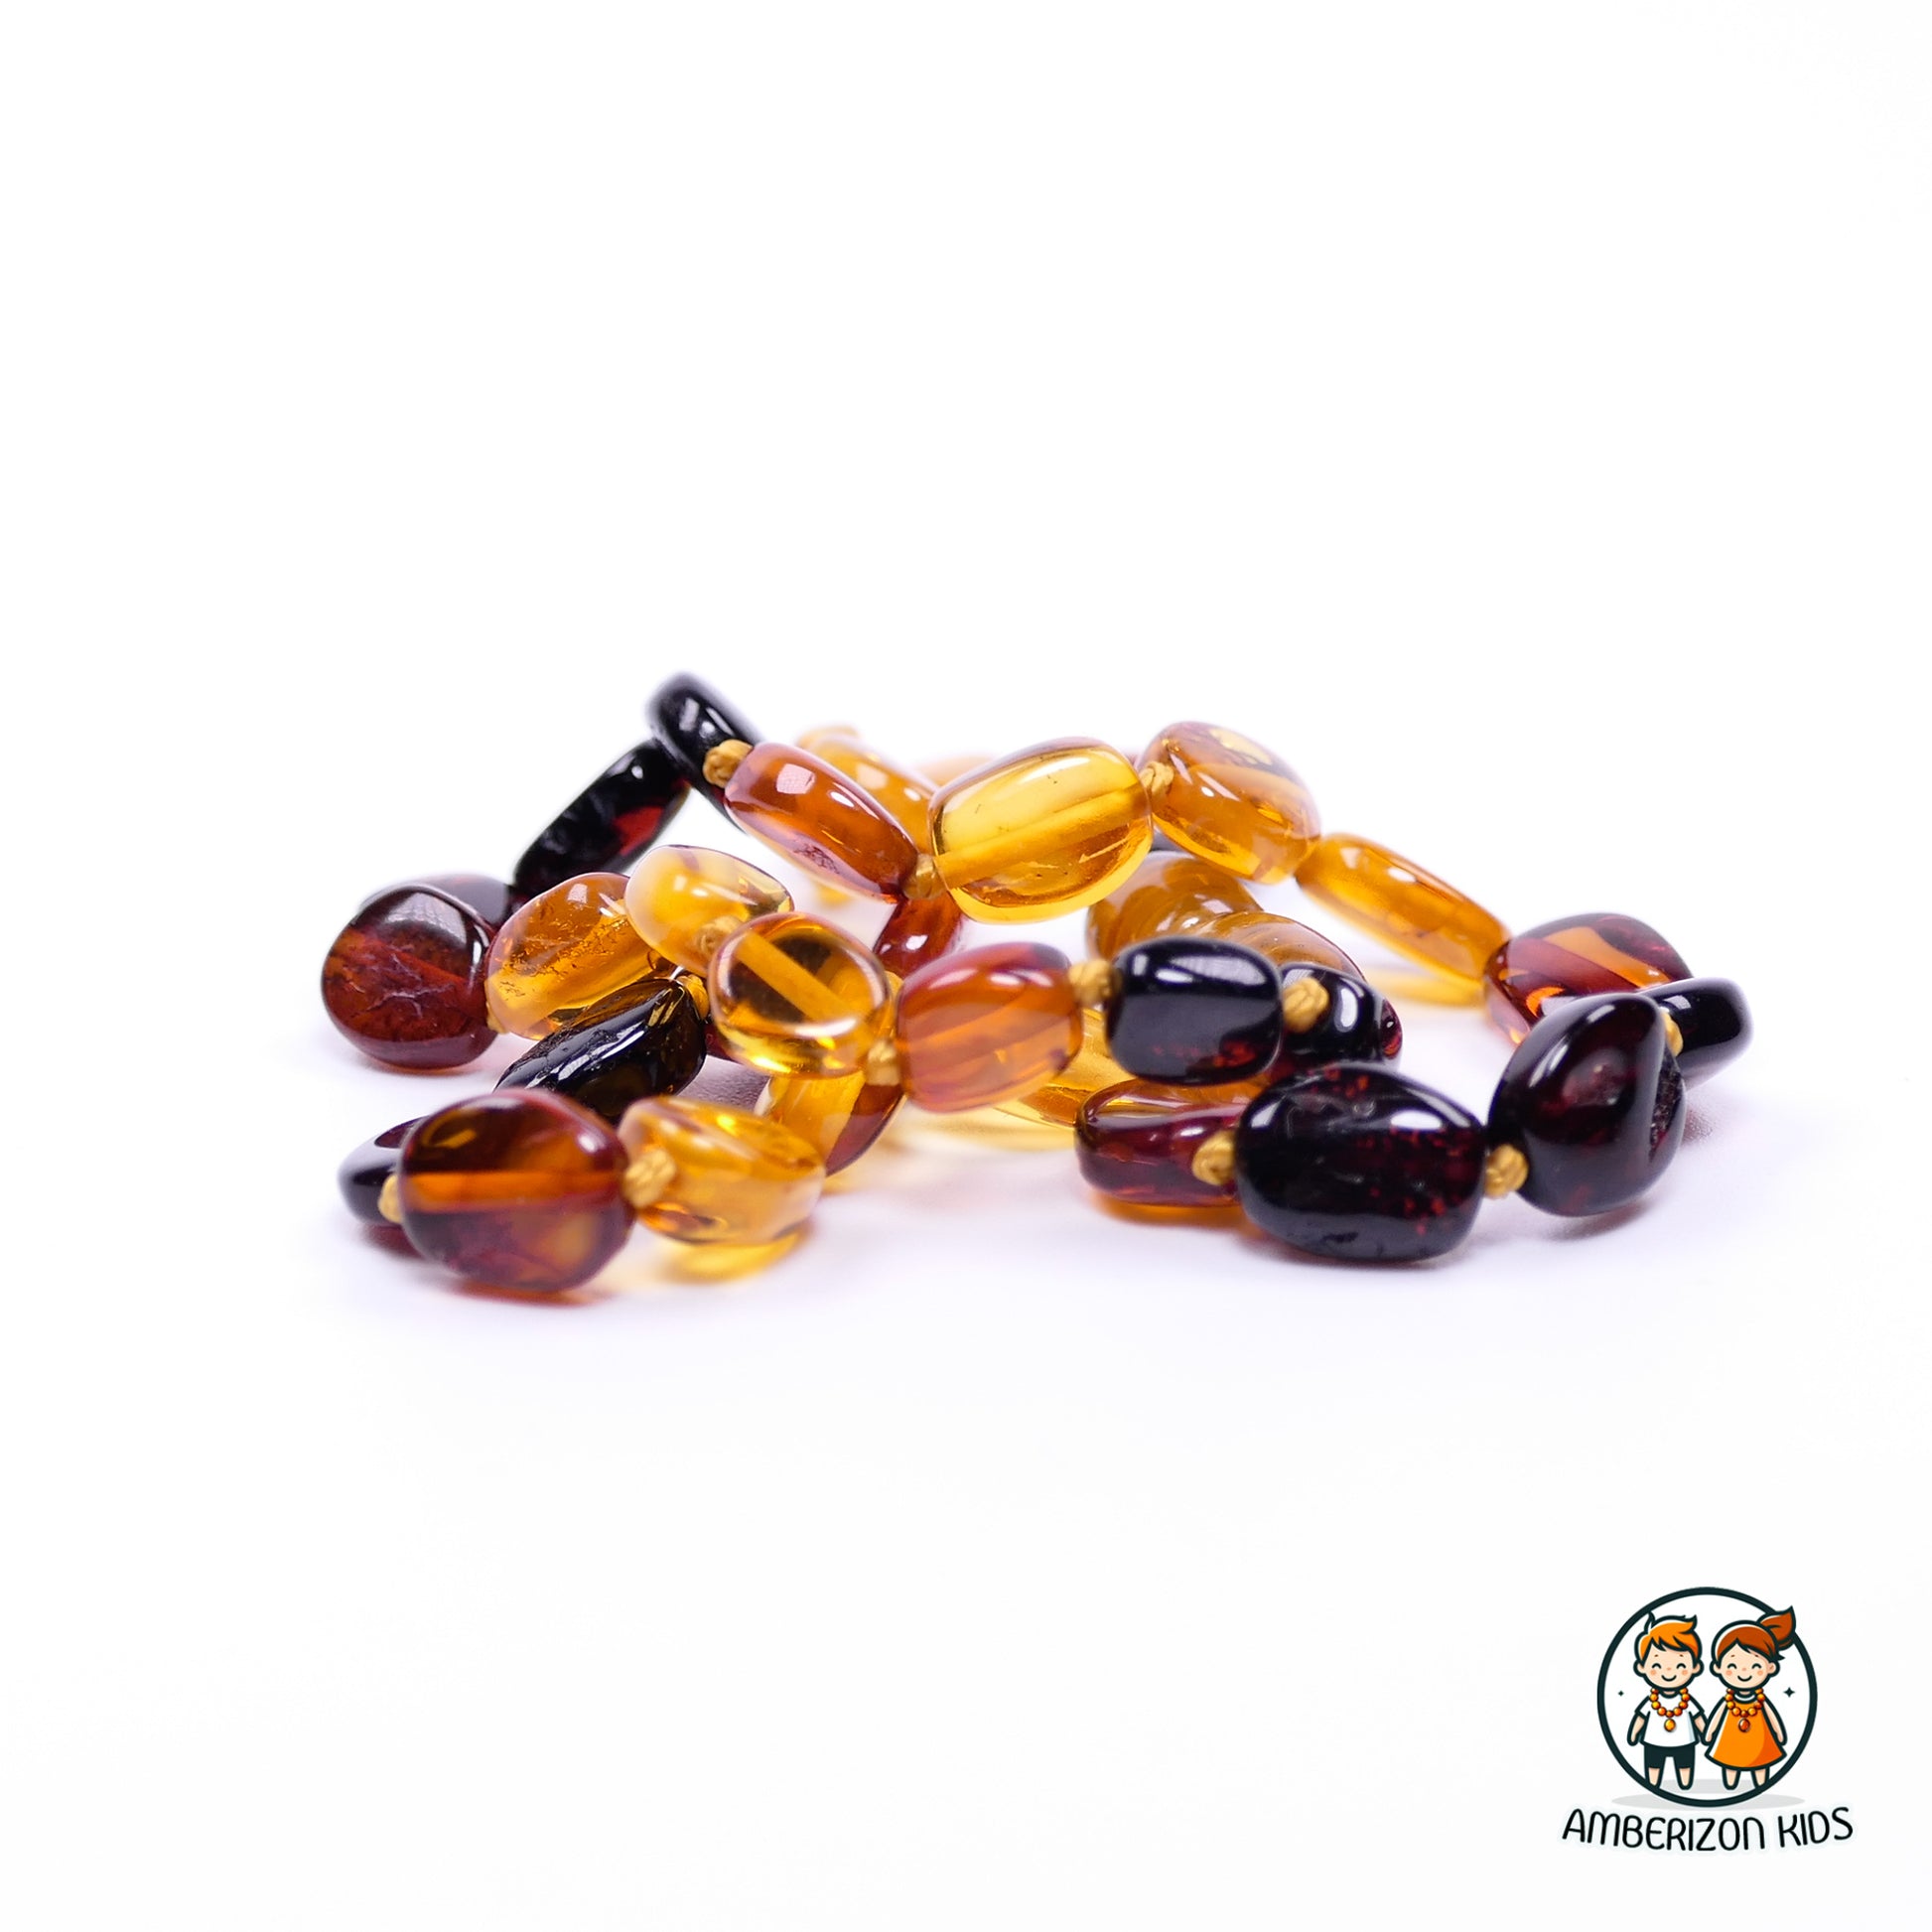 Radiant Spectrum: Genuine Baby Amber Necklace - Unisex - Handcrafted with Smooth Olive Amber Beads